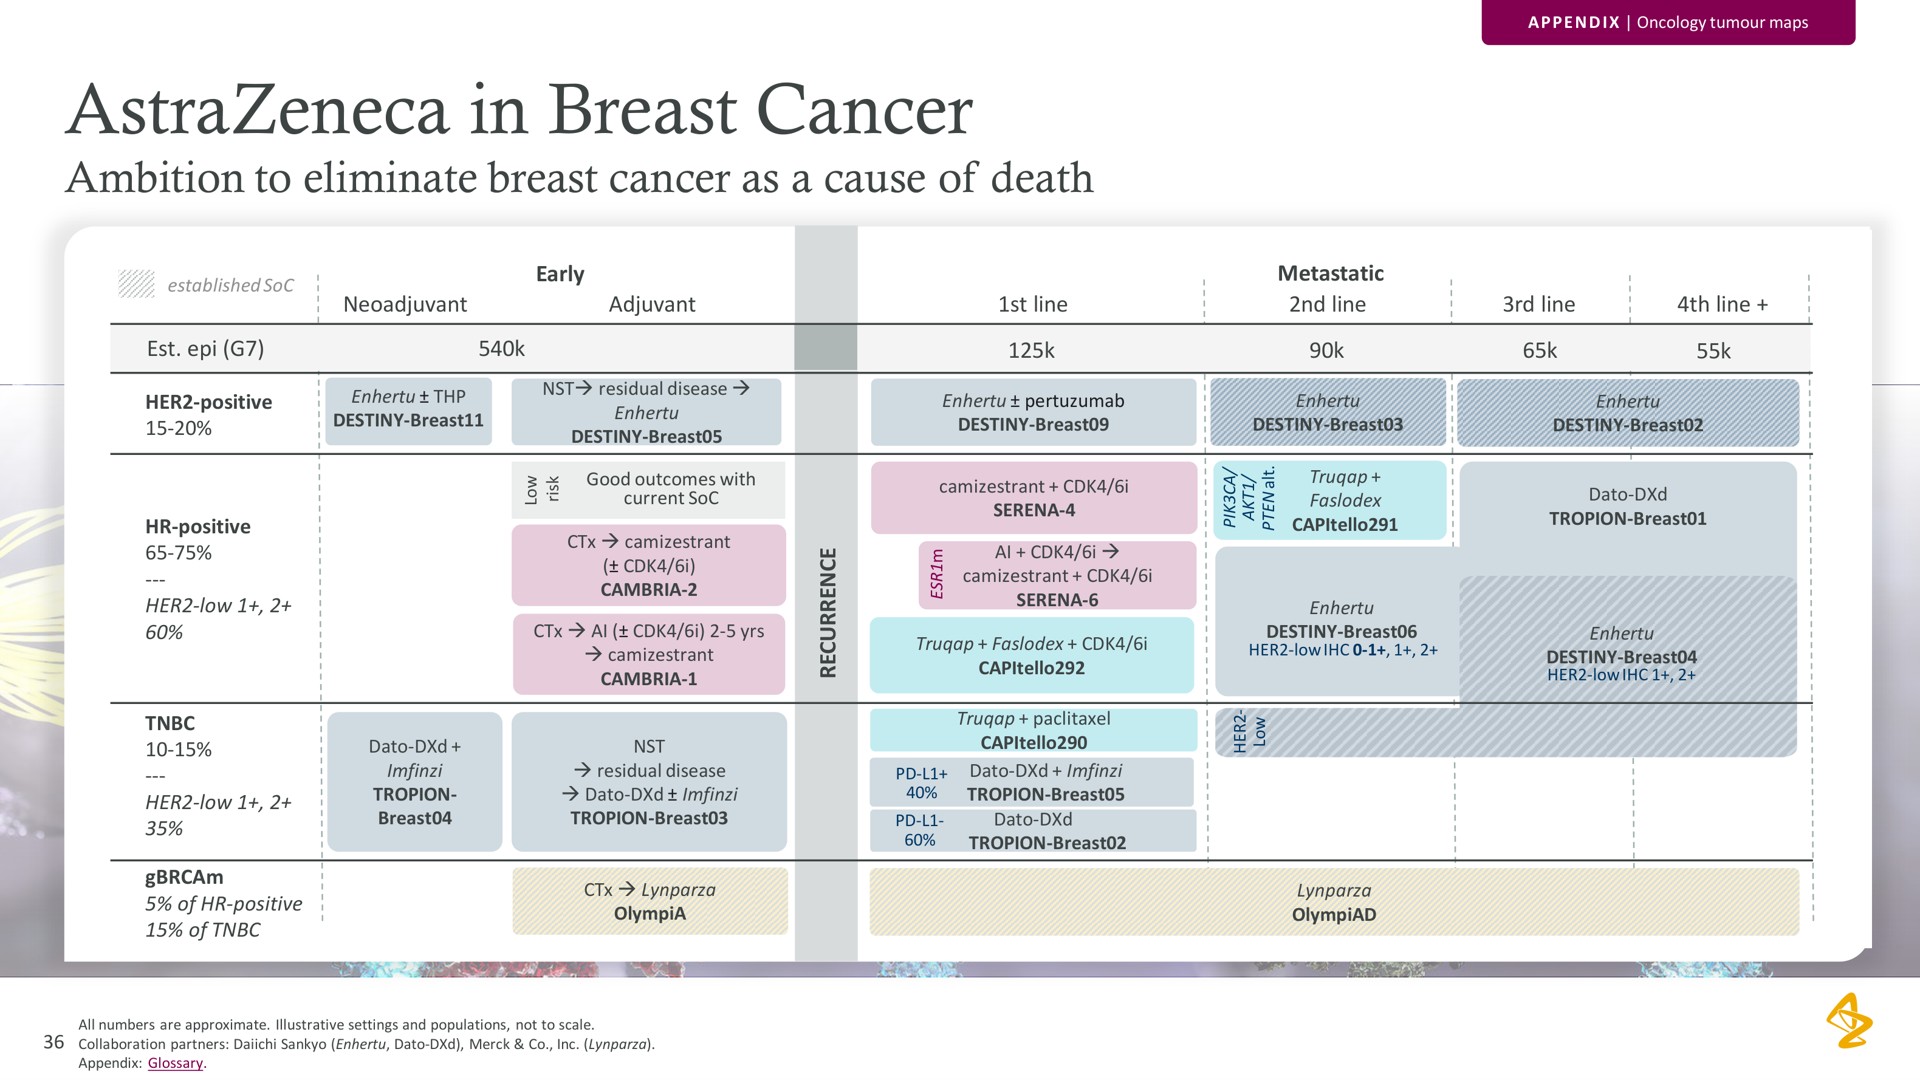 in breast cancer ambition to eliminate breast cancer as a cause of death waits | AstraZeneca